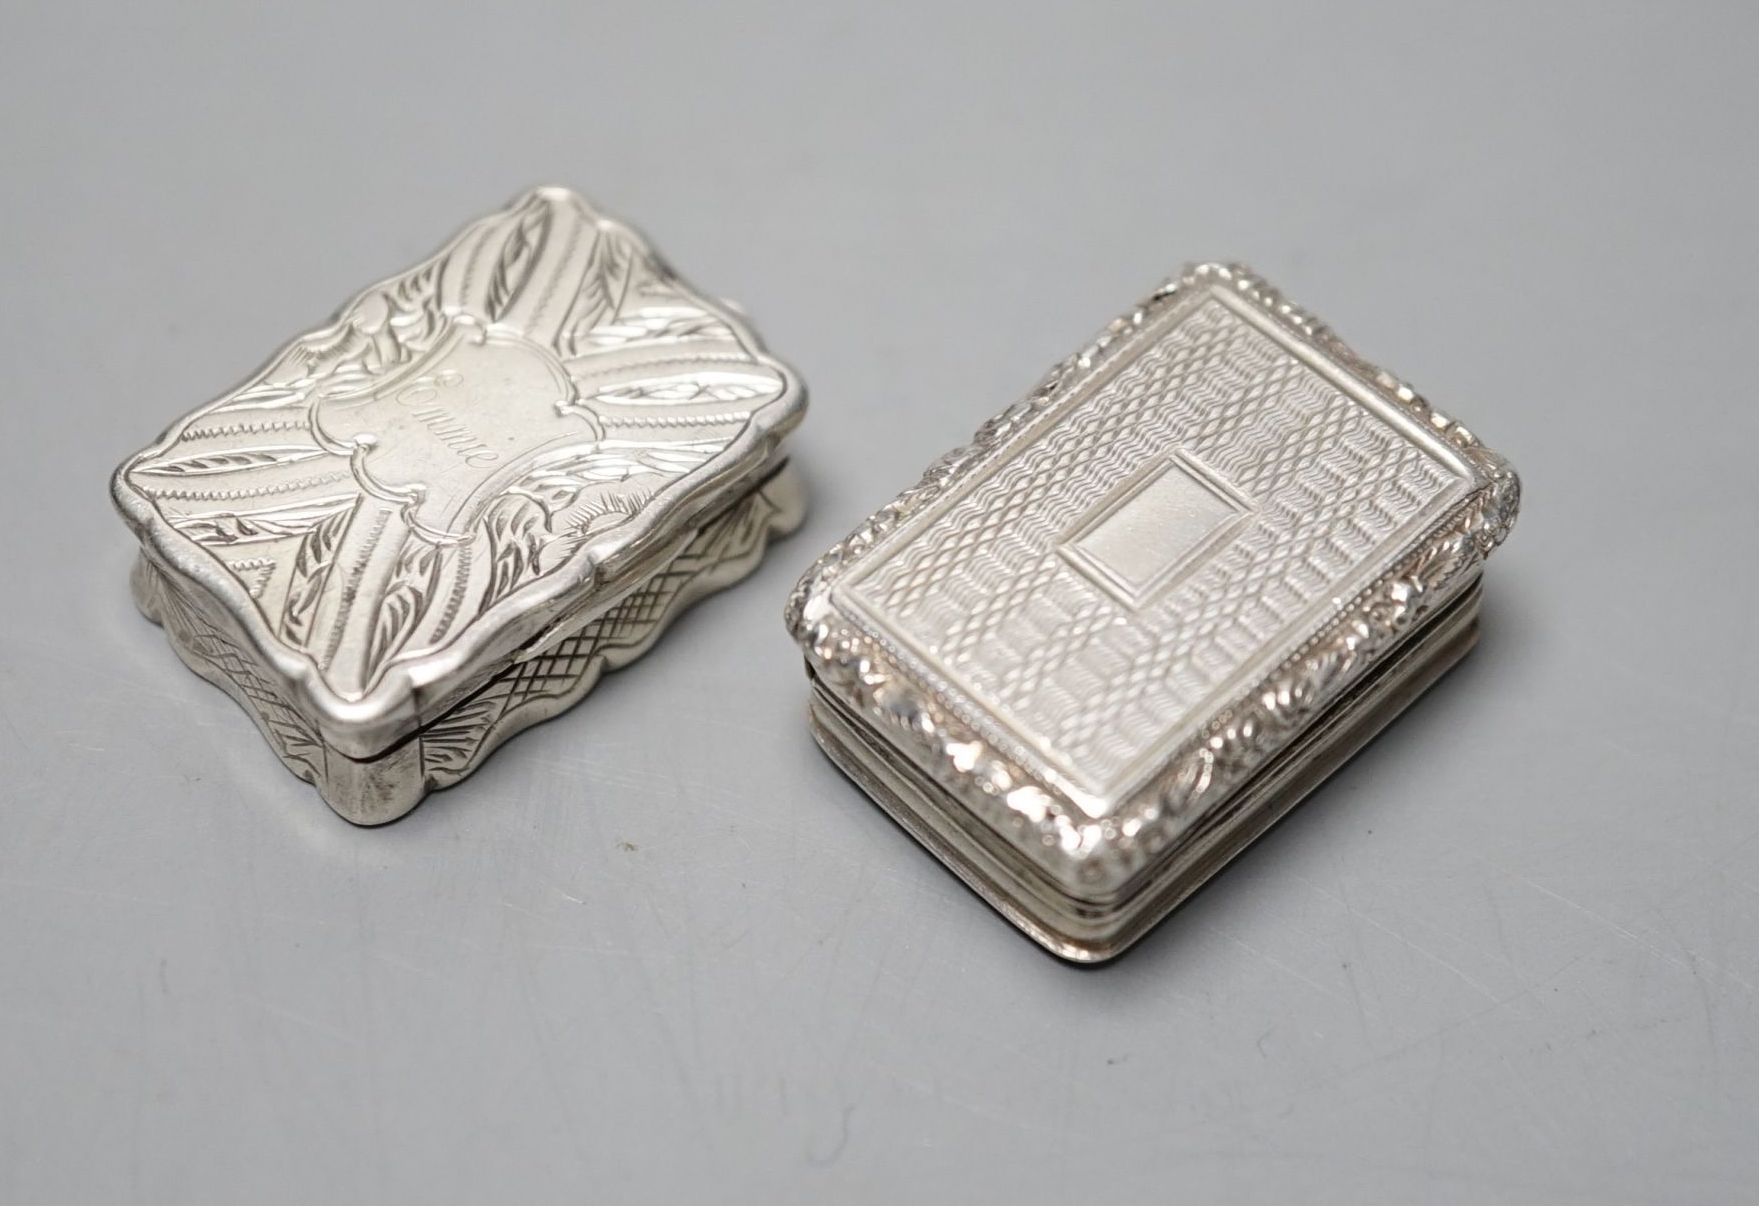 A George IV engine turned silver rectangular vinaigrette, Thomas & William Simpson, Birmingham, 1823, 30mm and a later silver vinaigrette by George Unite, Birmingham, 1866, engraved with the name 'Emmie', 29mm.